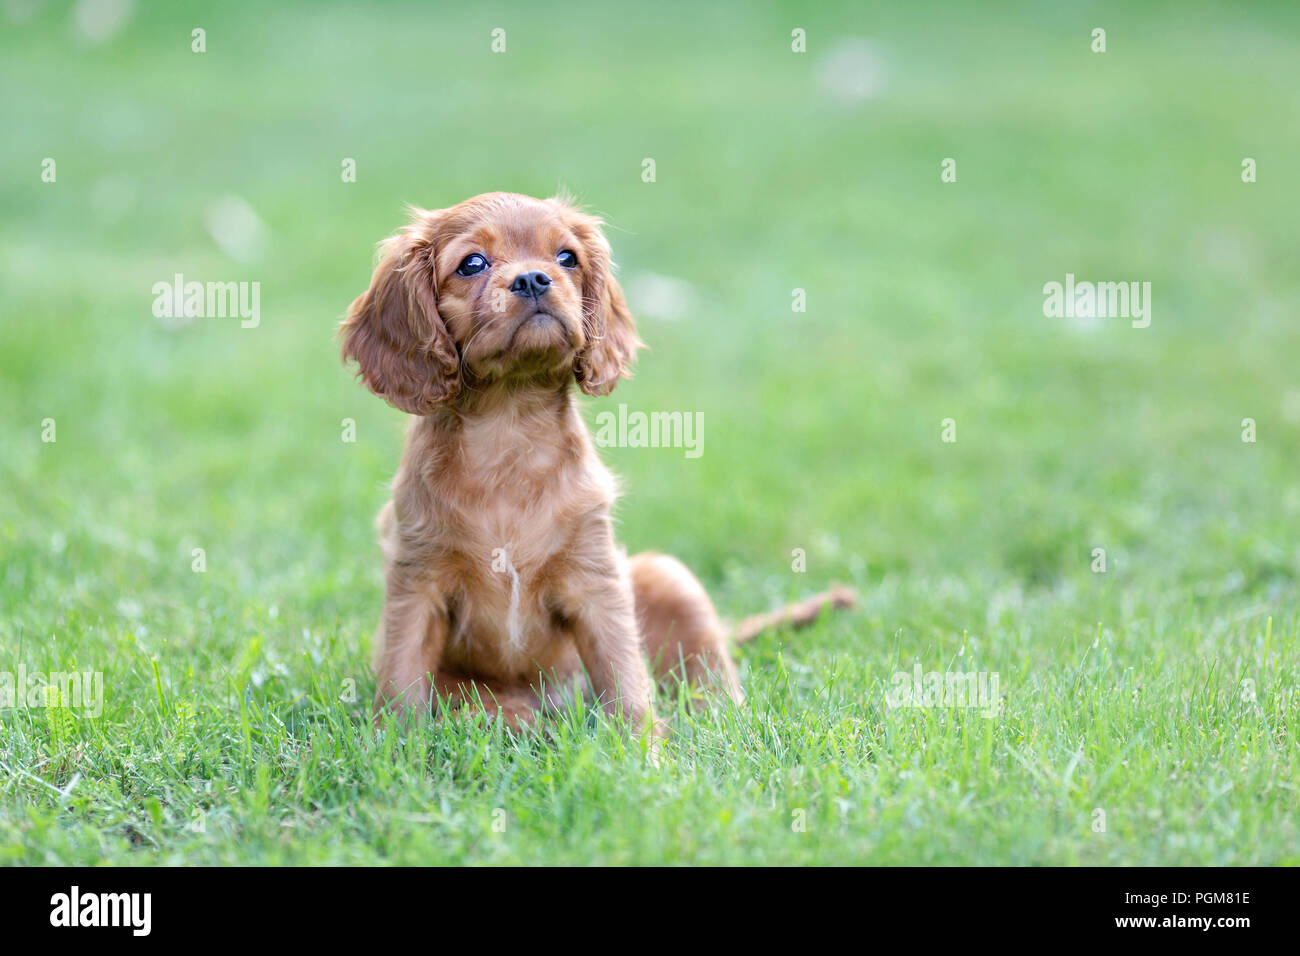 Cute puppy sitting on the green grass Stock Photo